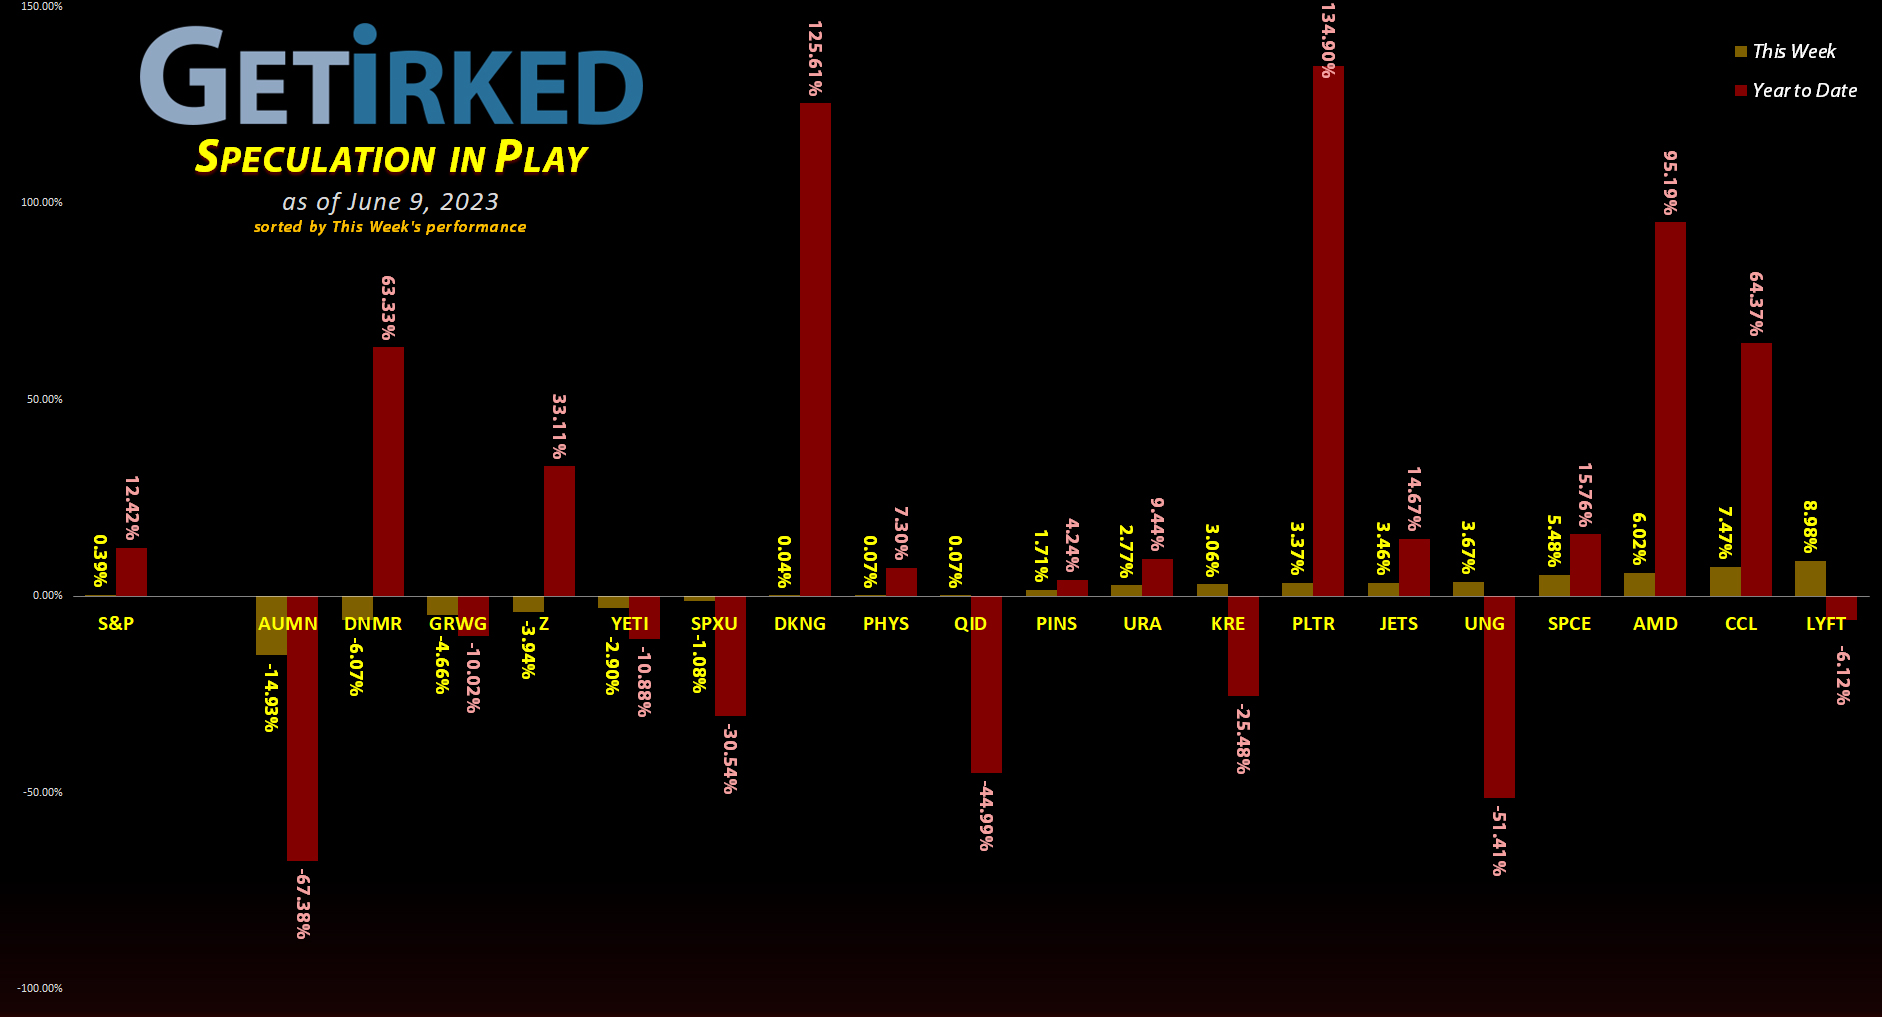 Get Irked's Speculation in Play - June 9, 2023